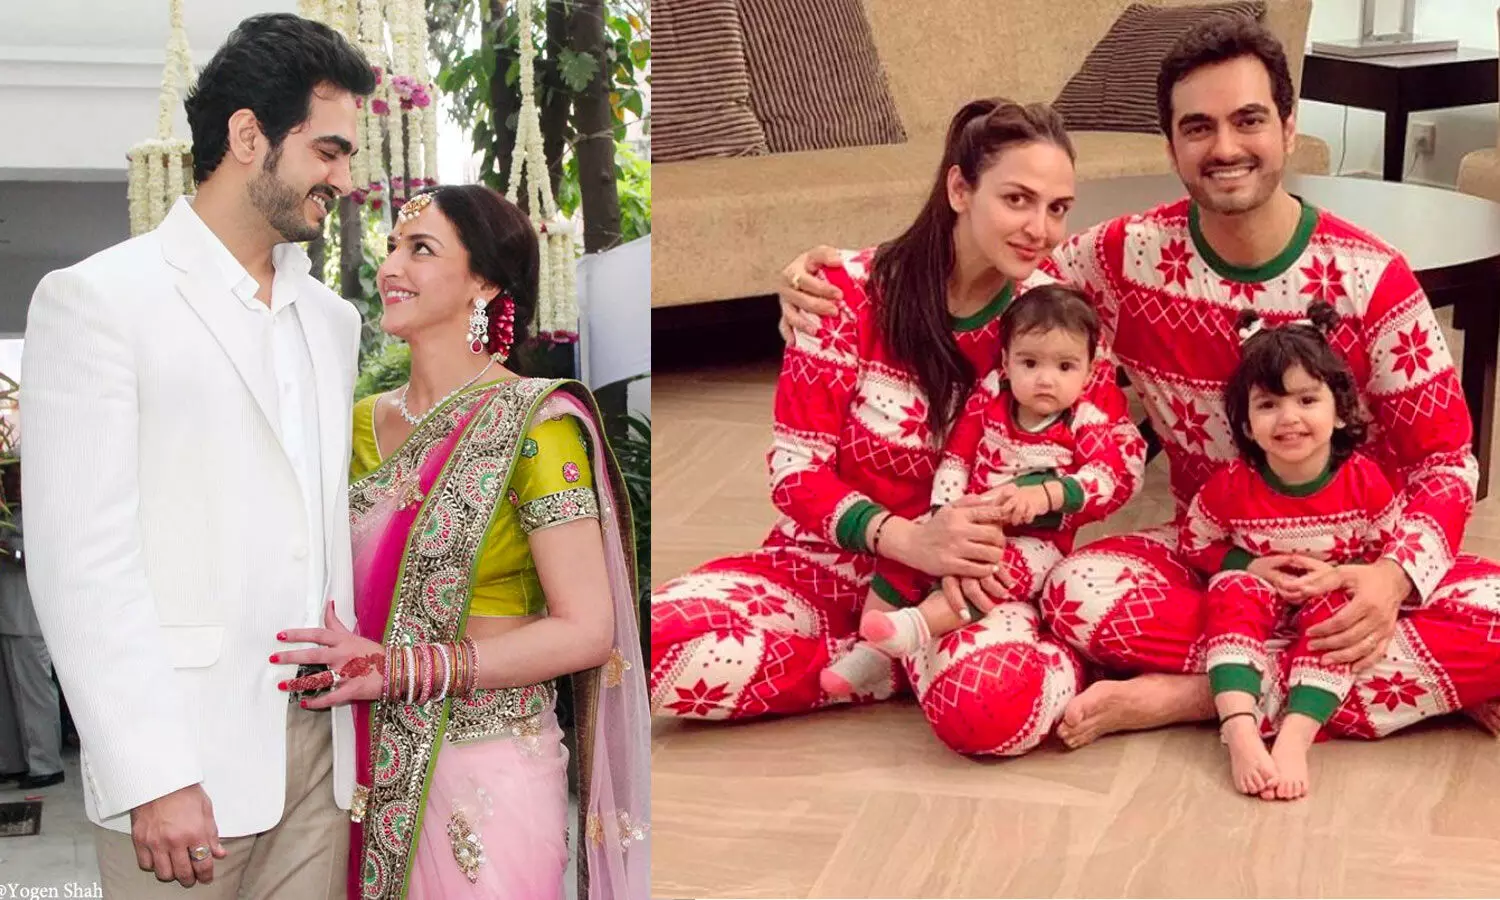 Breaking News: Esha Deol and Bharat Takhtani Confirm Divorce After 12 Years